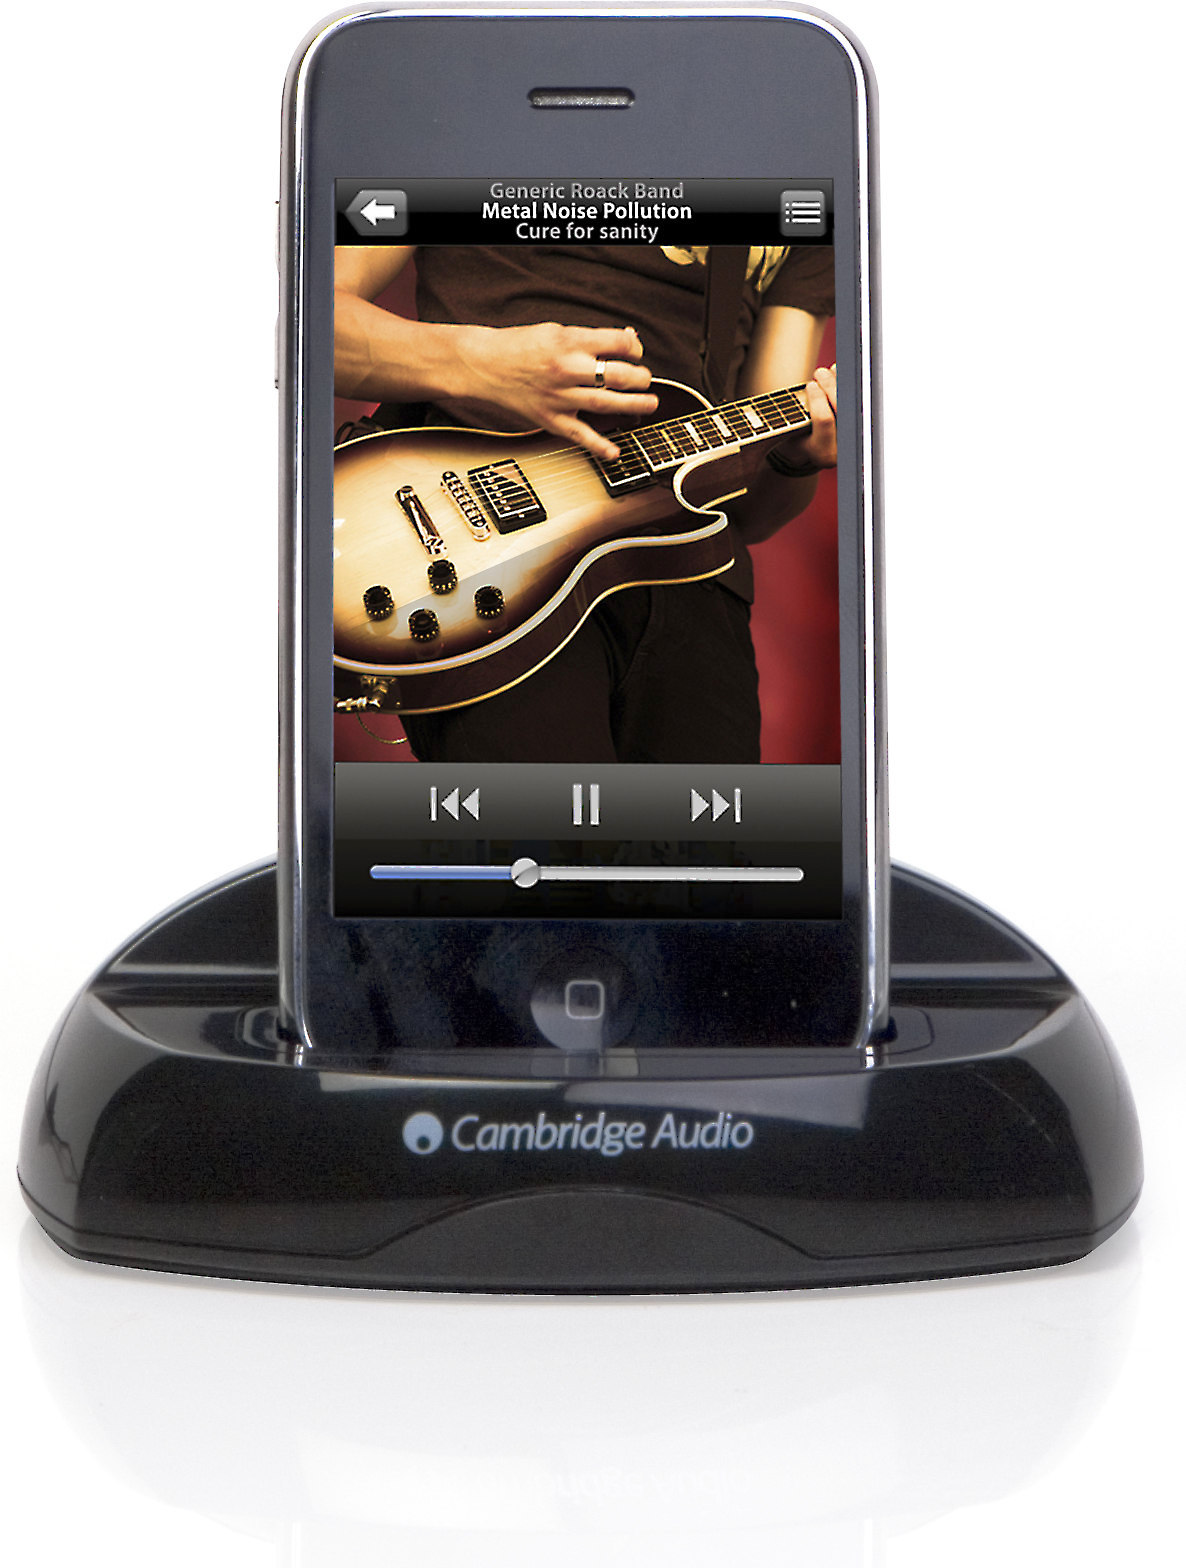 Sonos Wireless Dock 100 for iPod and iPhone Discontinued by Manufacturer